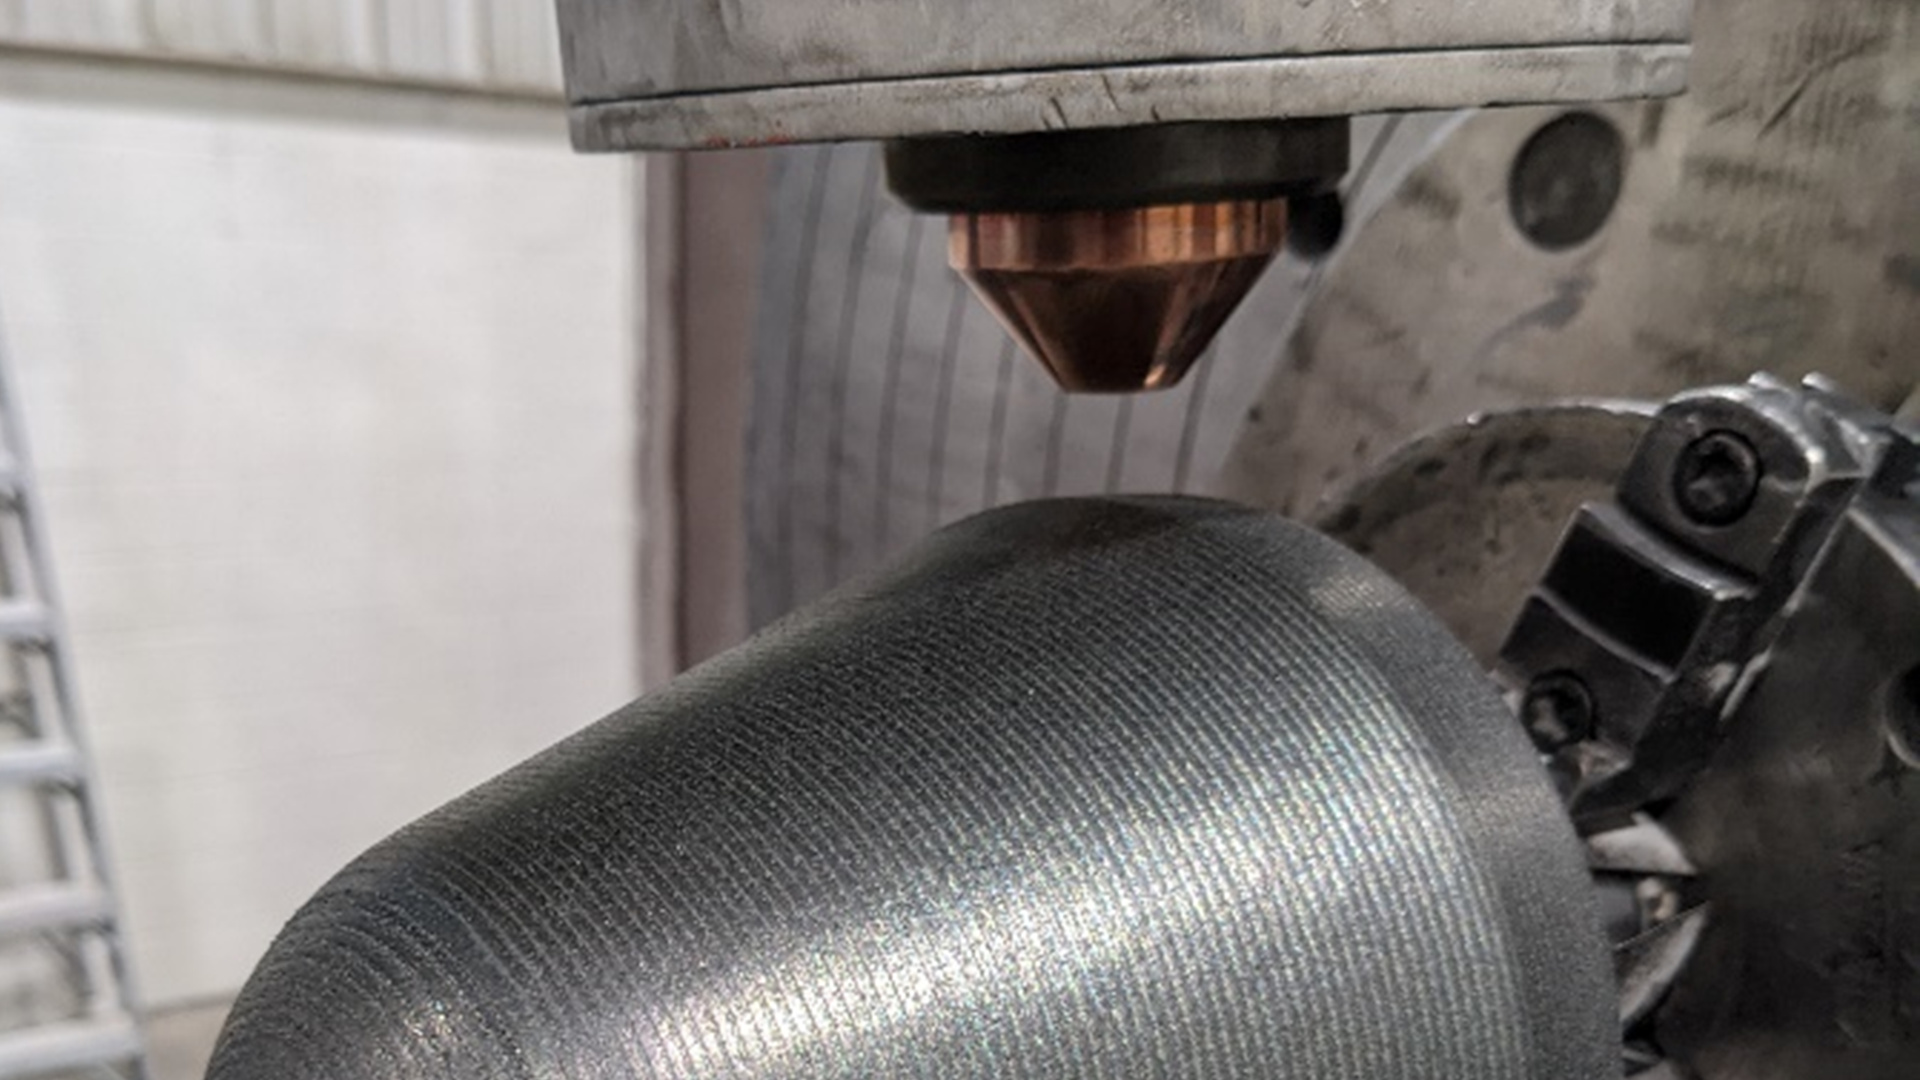 Wear parts like this stone crusher tooth with an outer diameter of about 140 mm are restored with the LMD process. Thanks to AI, the processes for repairing irregular surfaces shall be optimized.